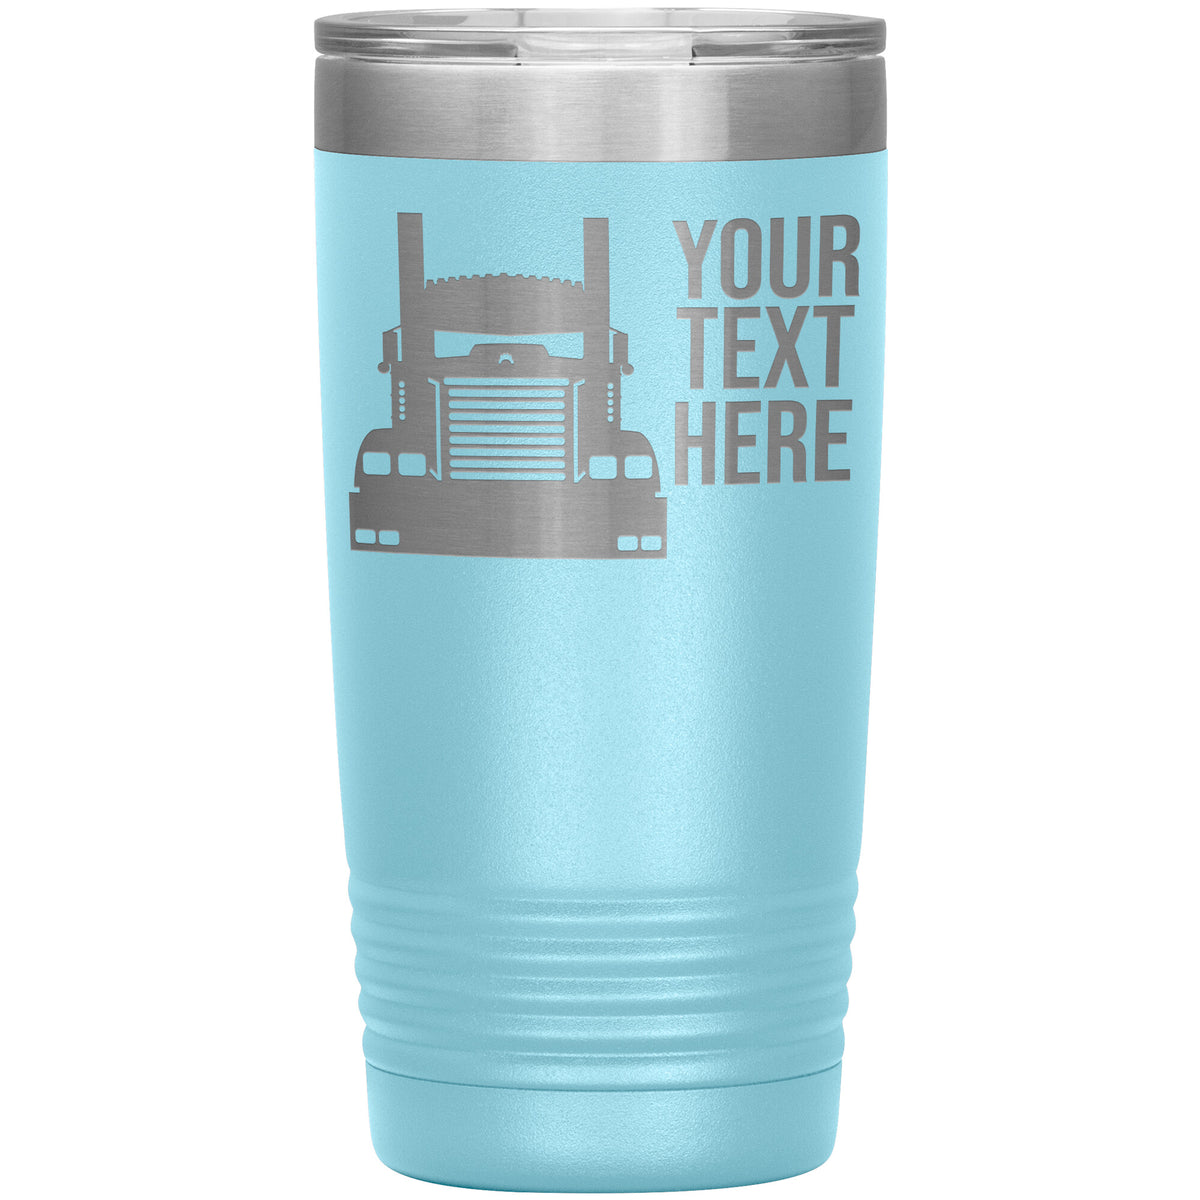 KW 900 Your Text Here 20oz Tumbler Free Shipping